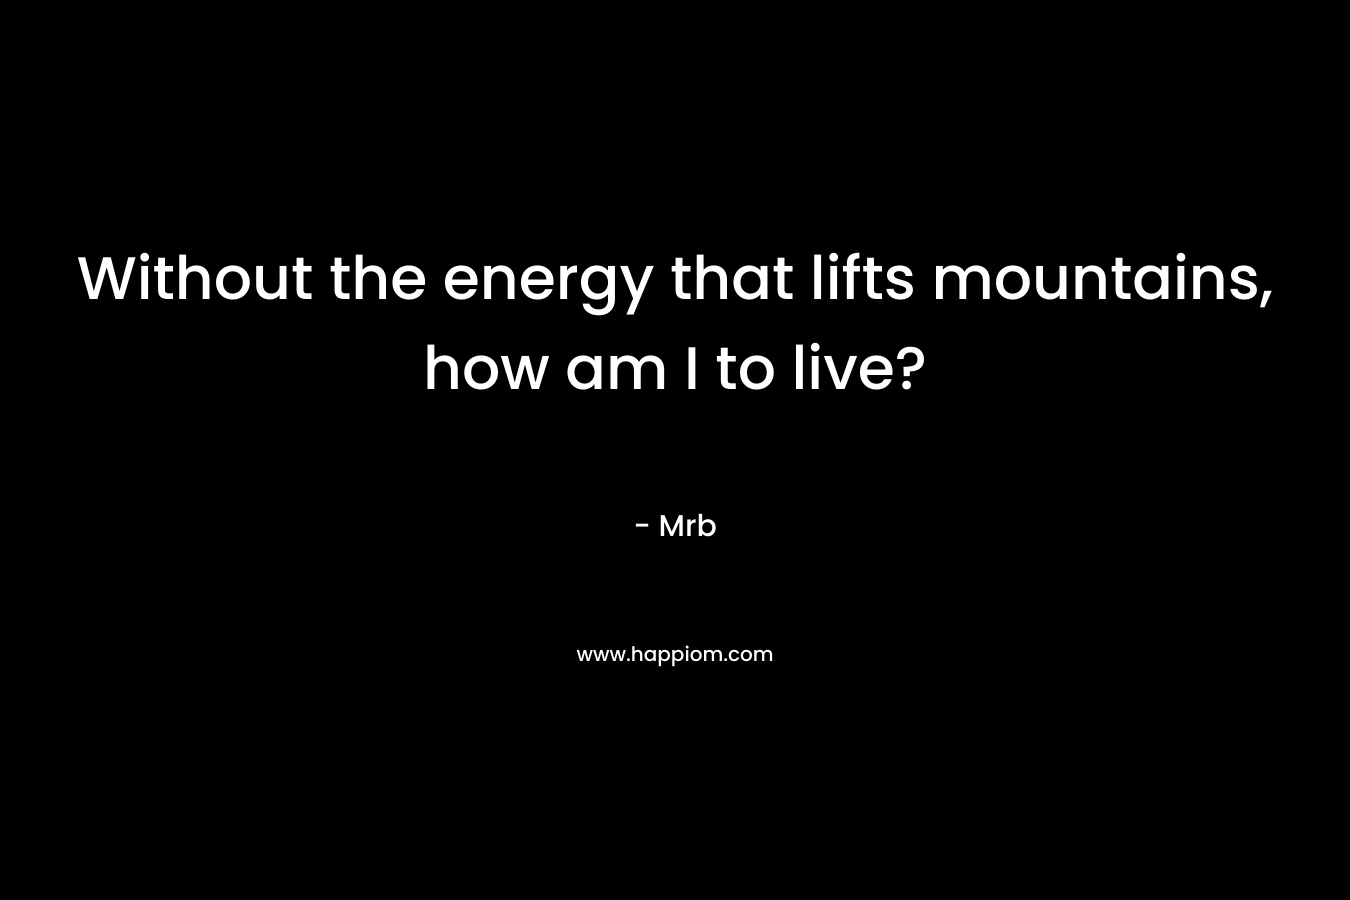 Without the energy that lifts mountains, how am I to live? – Mrb